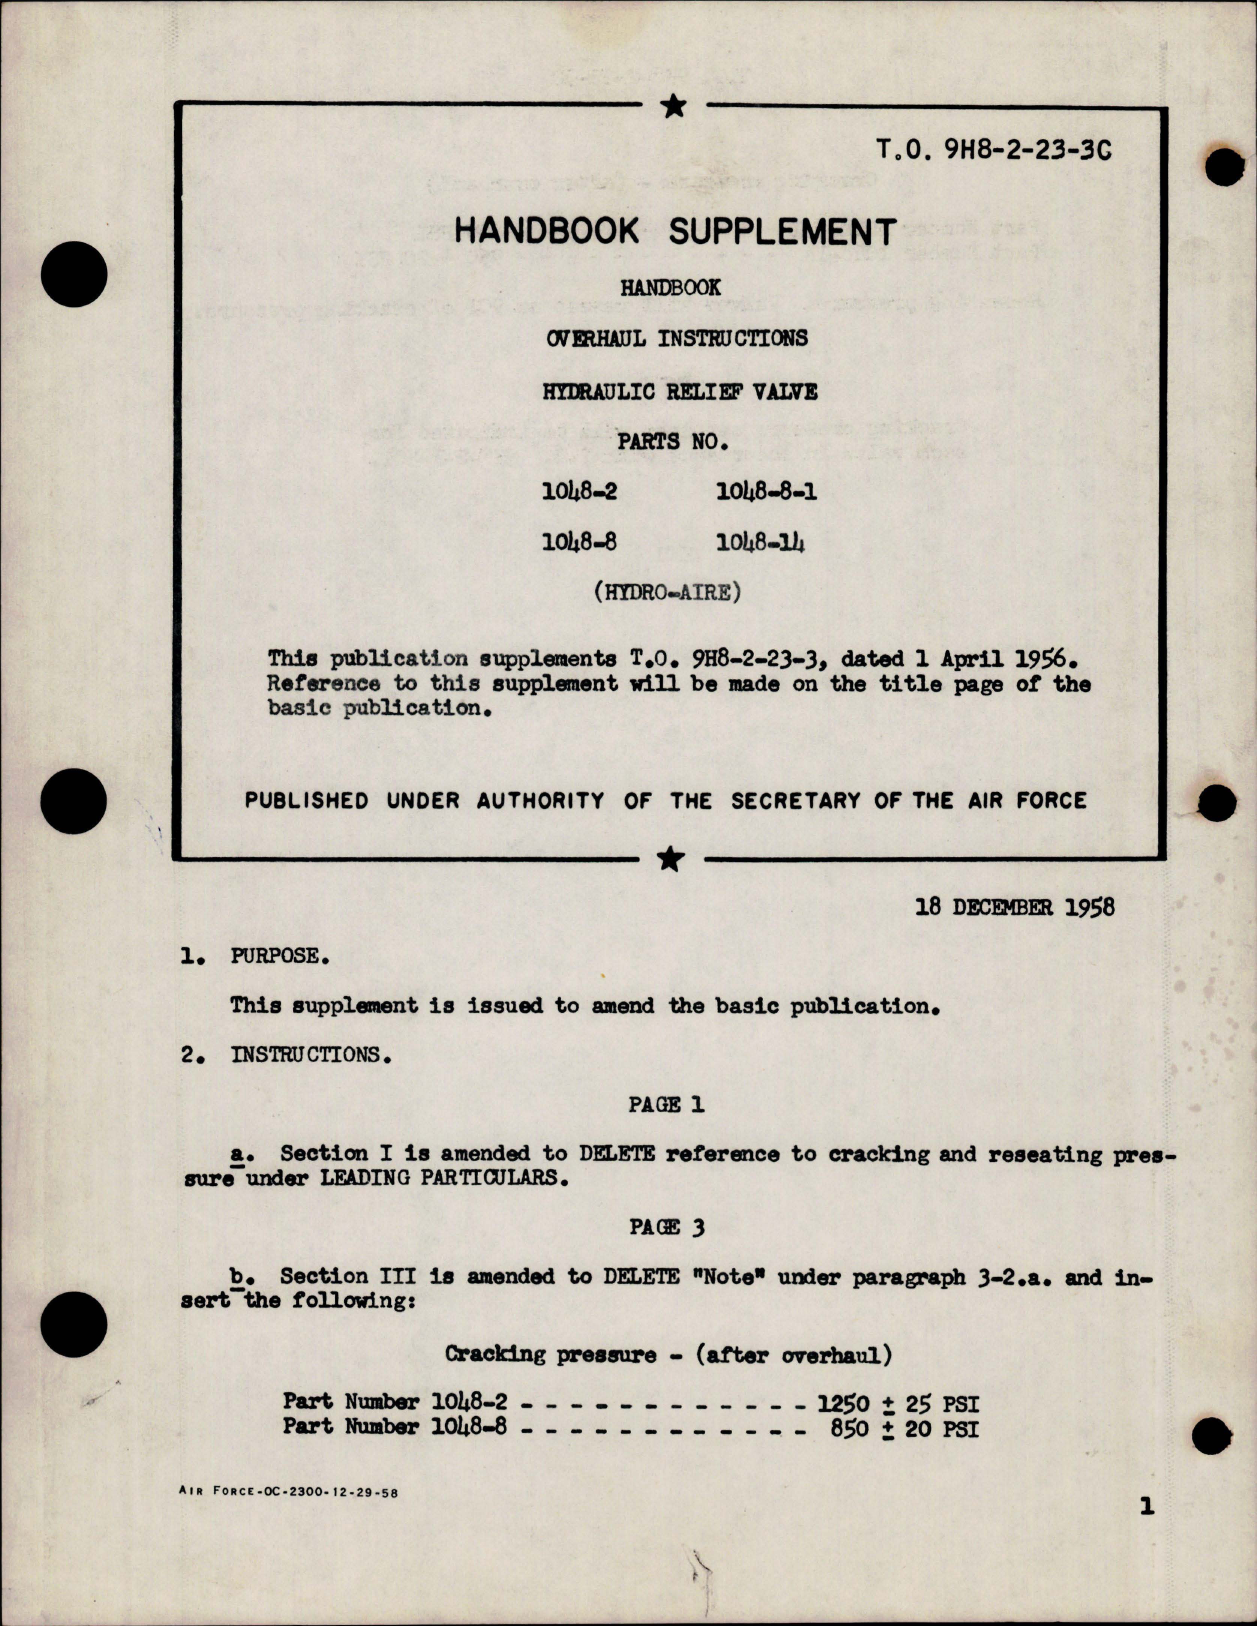 Sample page 1 from AirCorps Library document: Supplement to Overhaul Instructions for Hydraulic Relief Valve - Parts 1048-2, 1048-8, 1048-8-1, 1048-14